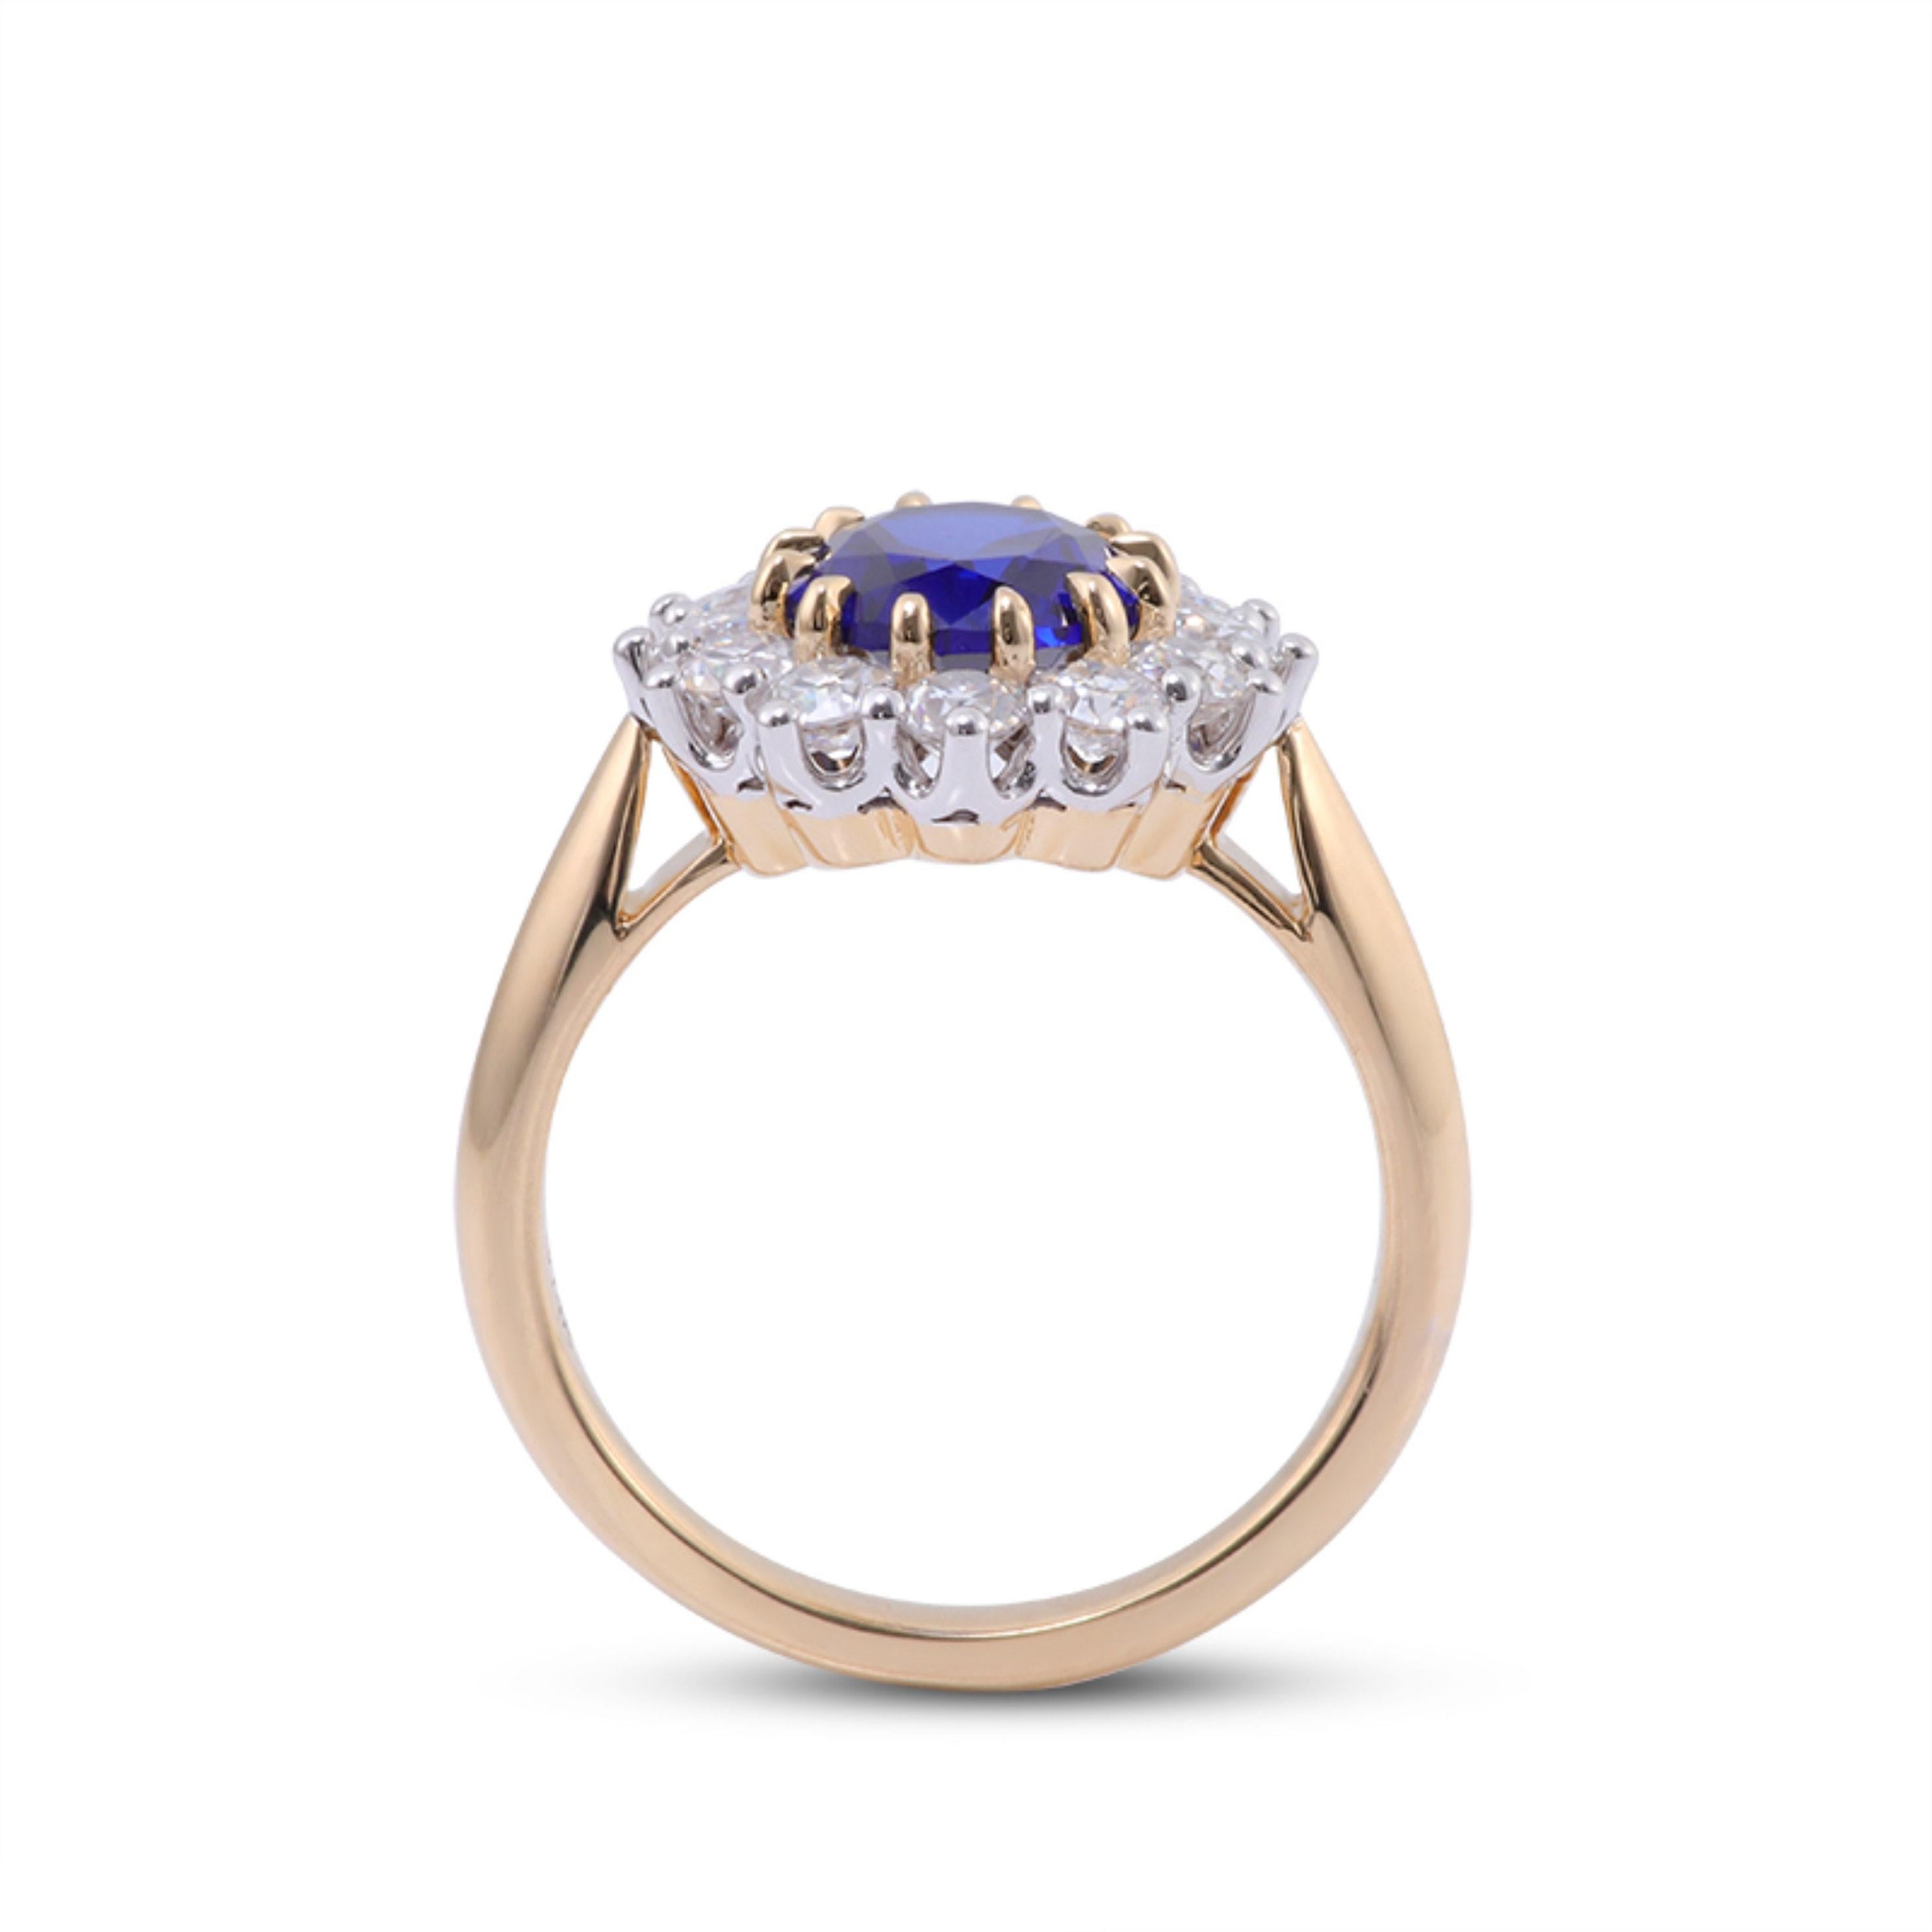 For Sale:  2 Carat Natural Sapphire Diamond Engagement Ring Set in 18K Gold, Cocktail Ring 2